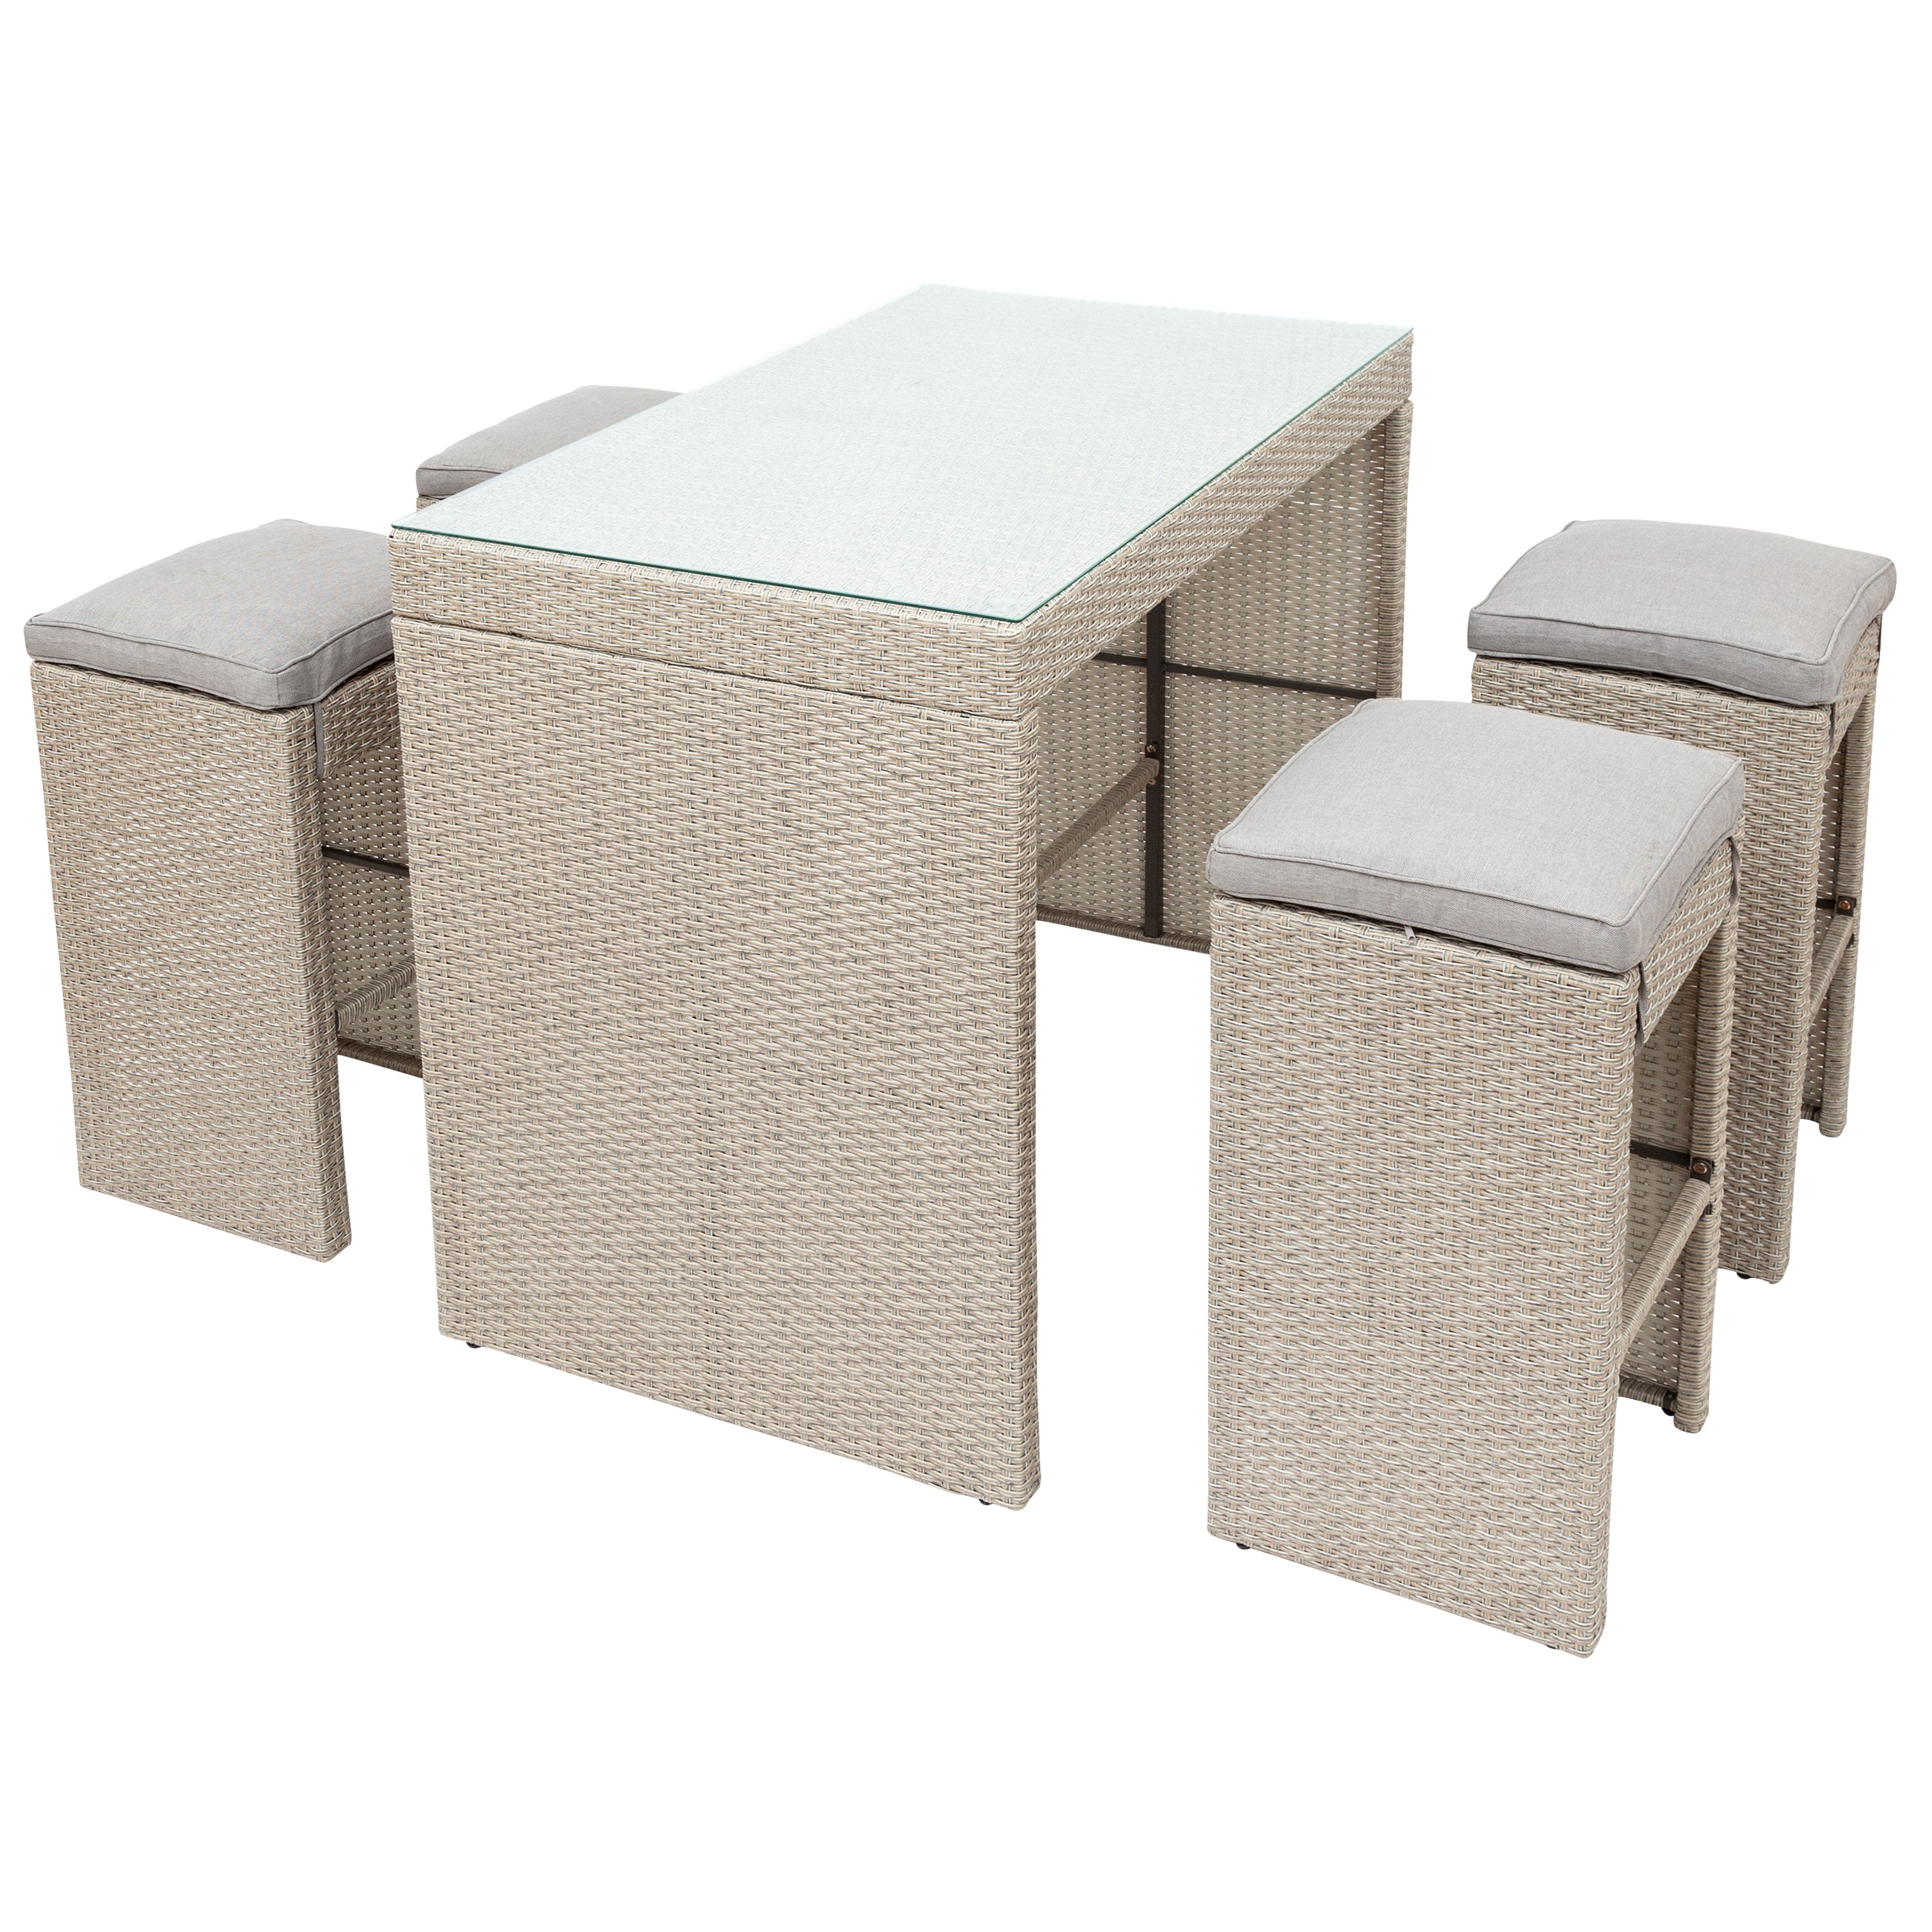 MAICOSY 5 Piece Rattan Outdoor Patio Stool Set, Patio Cushioned Seats with Table